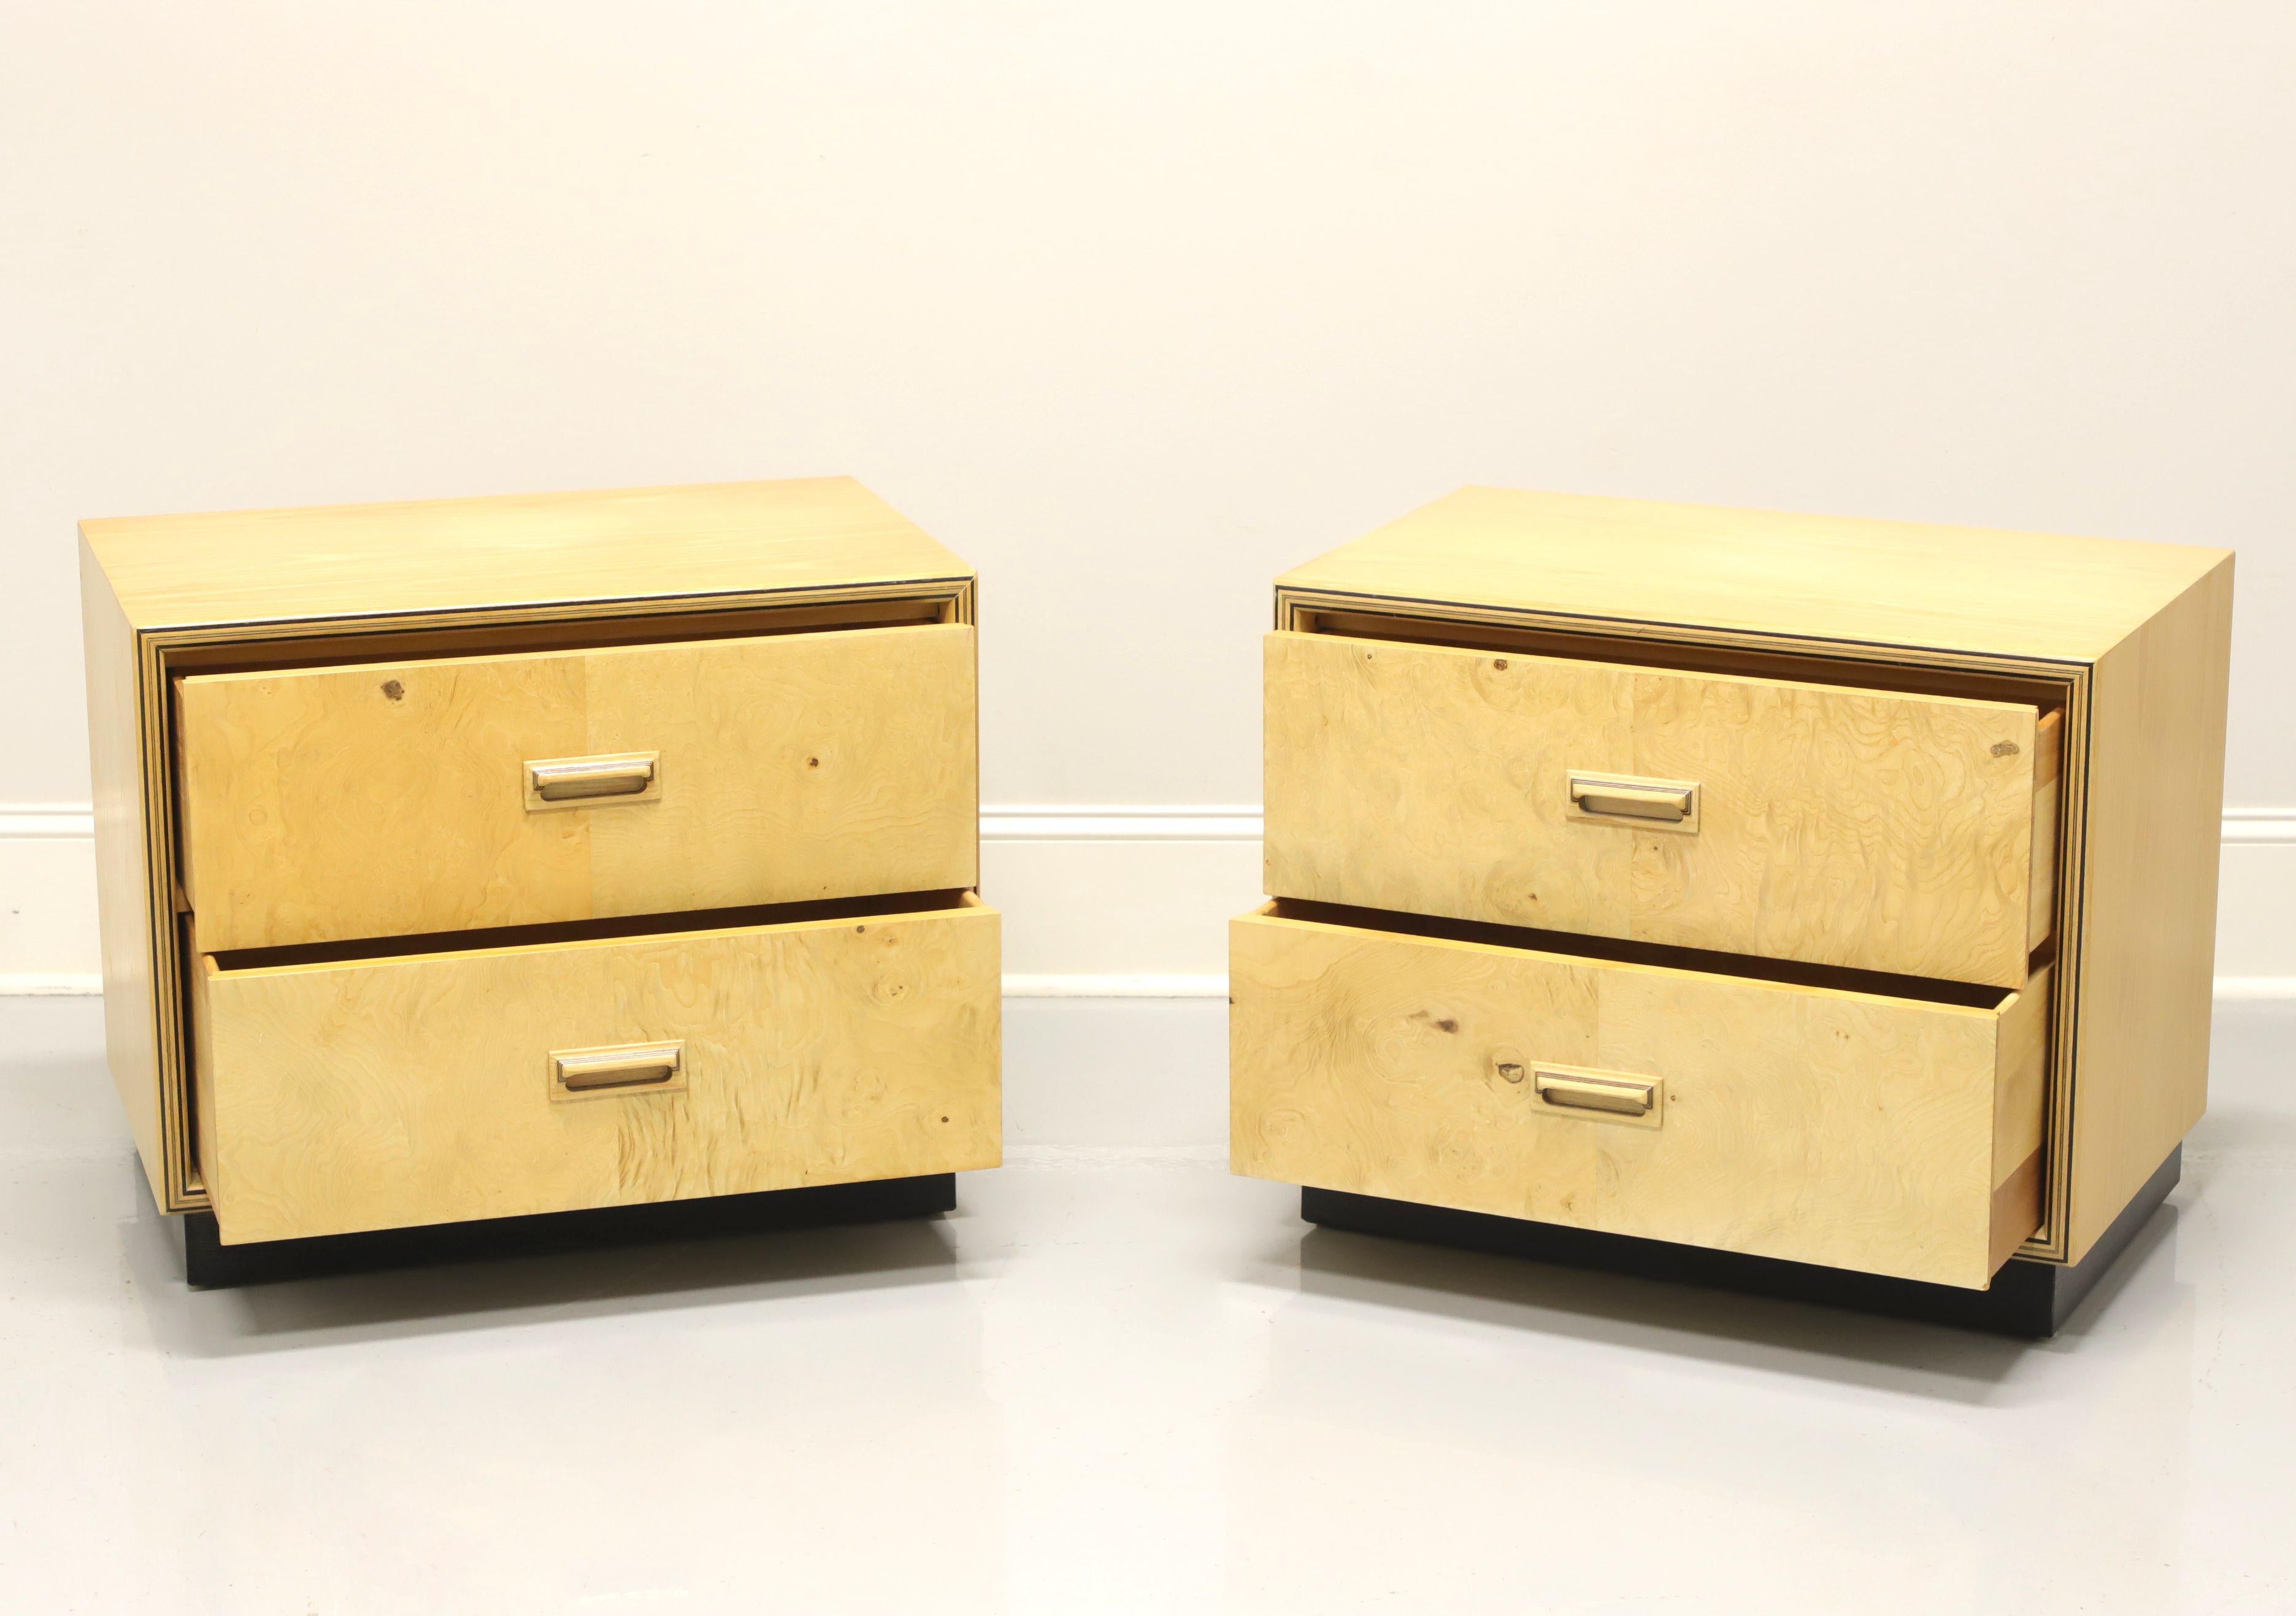 20th Century HENREDON Scene Two Art Deco Olive Wood Nightstands / Bedside Chests - Pair